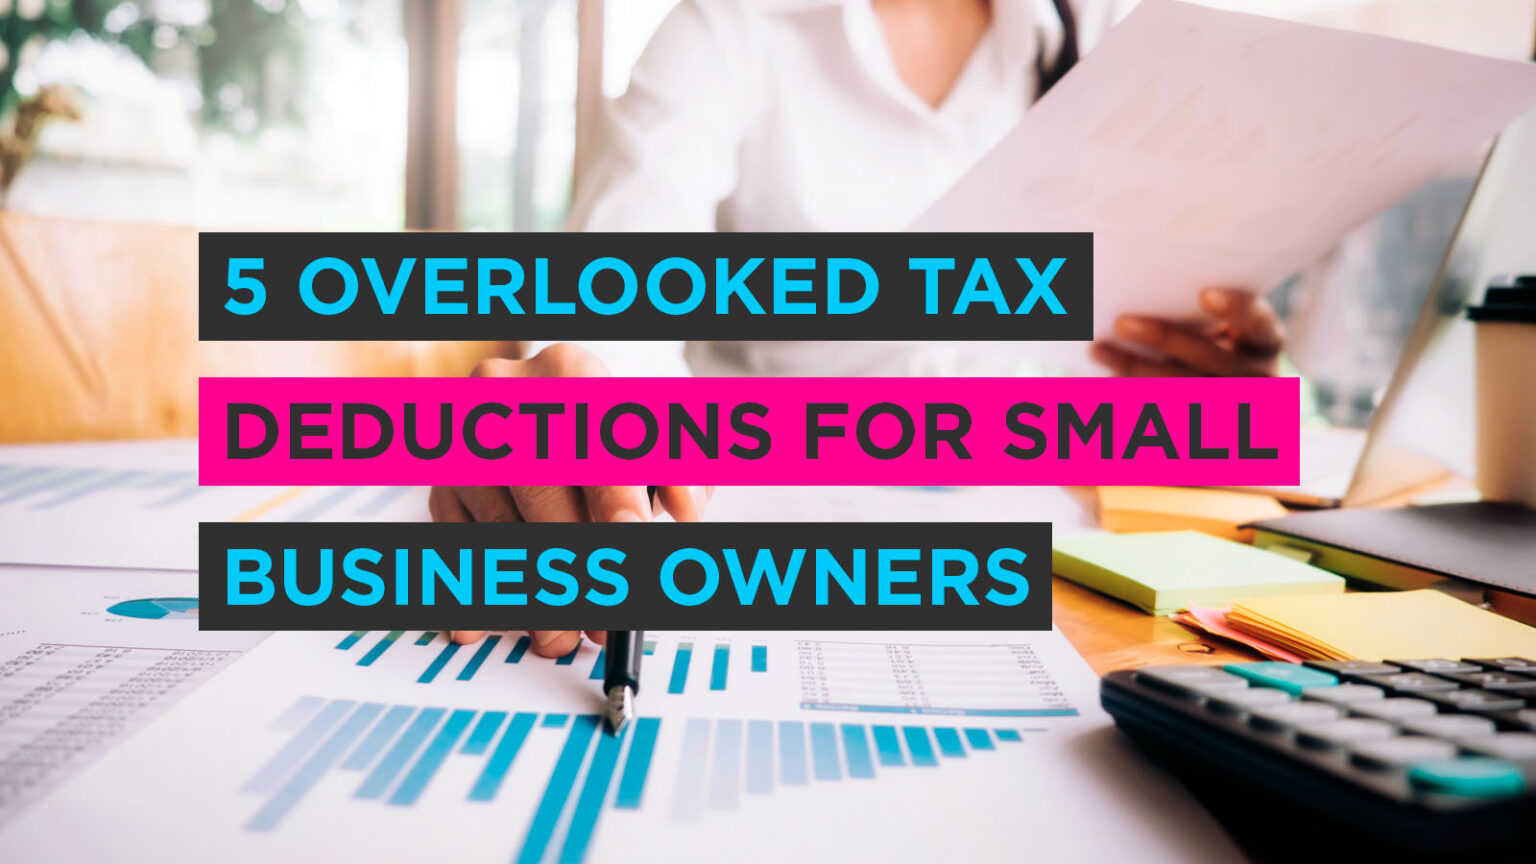 5 Overlooked Tax Deductions for Small Business Owners